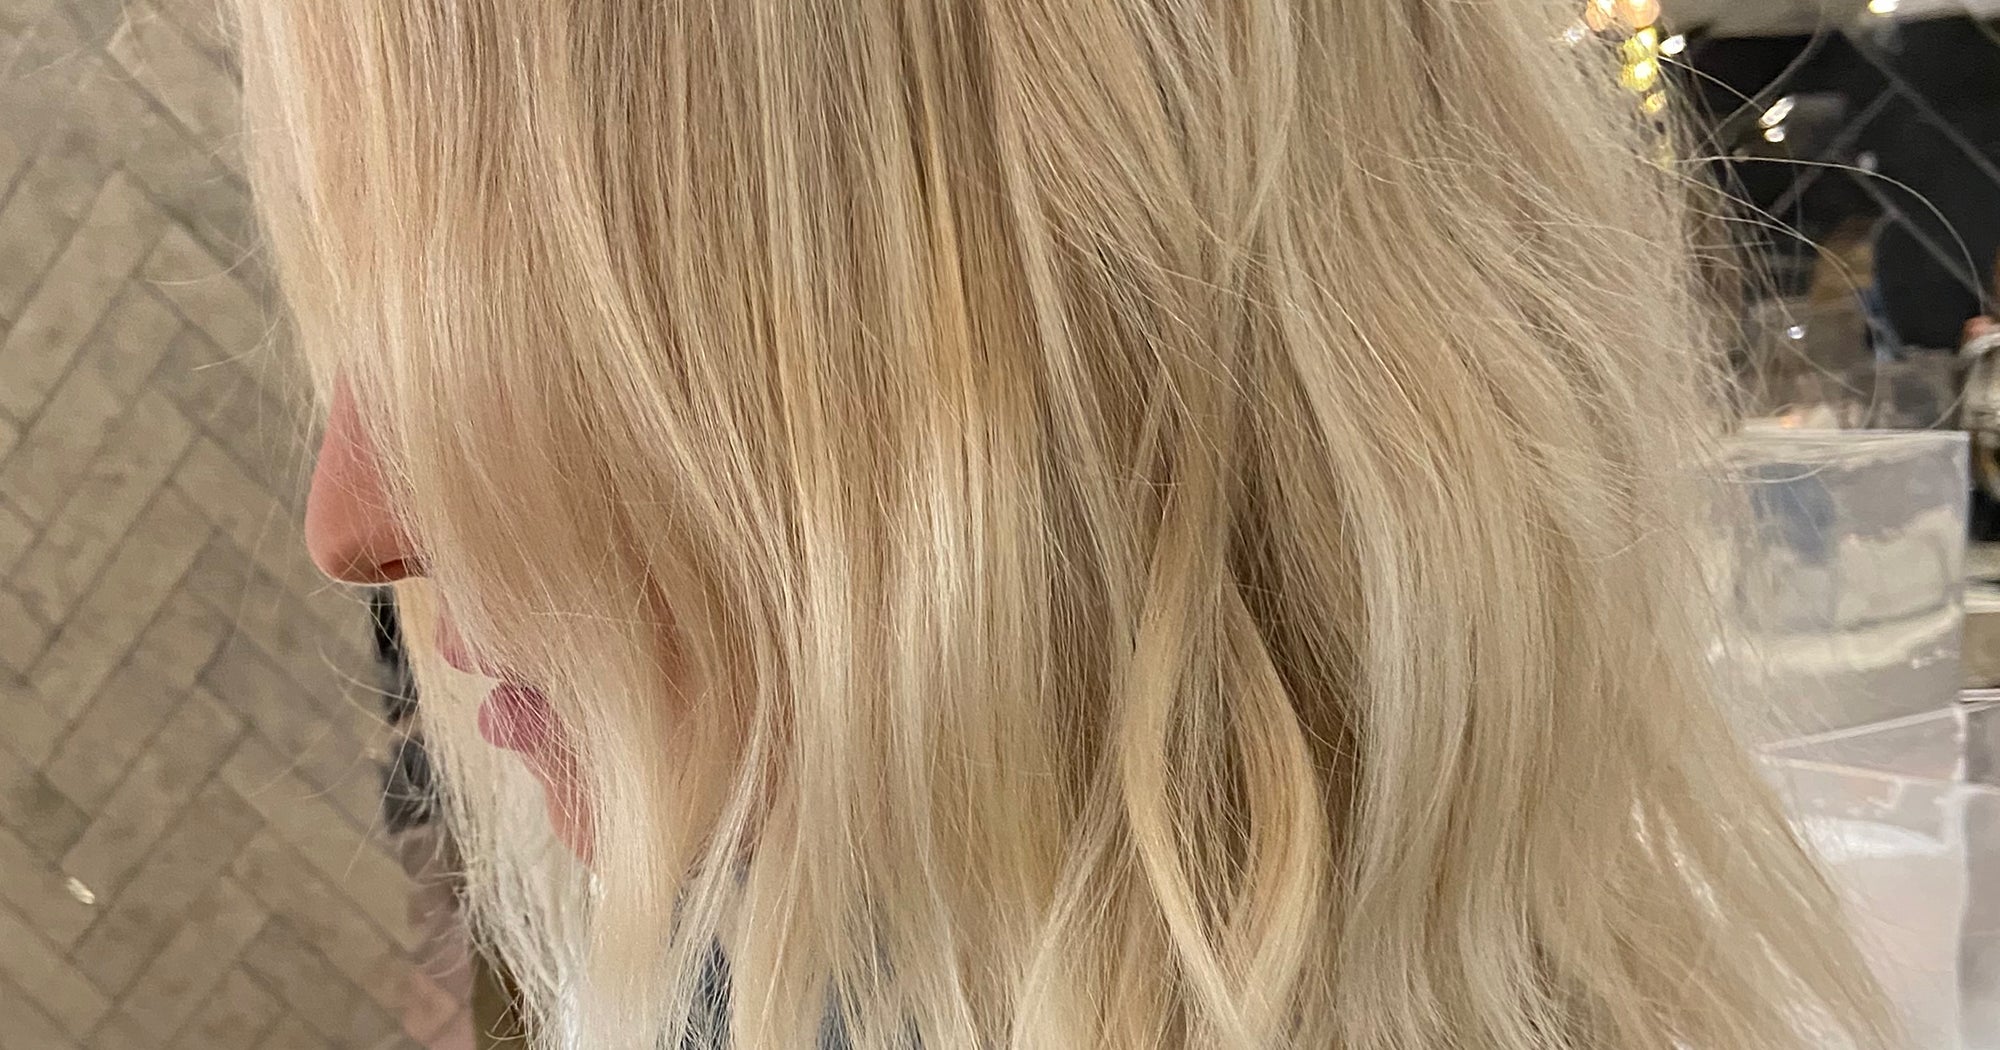 Stone Blonde Hair Is The New Platinum Color Trend 2020